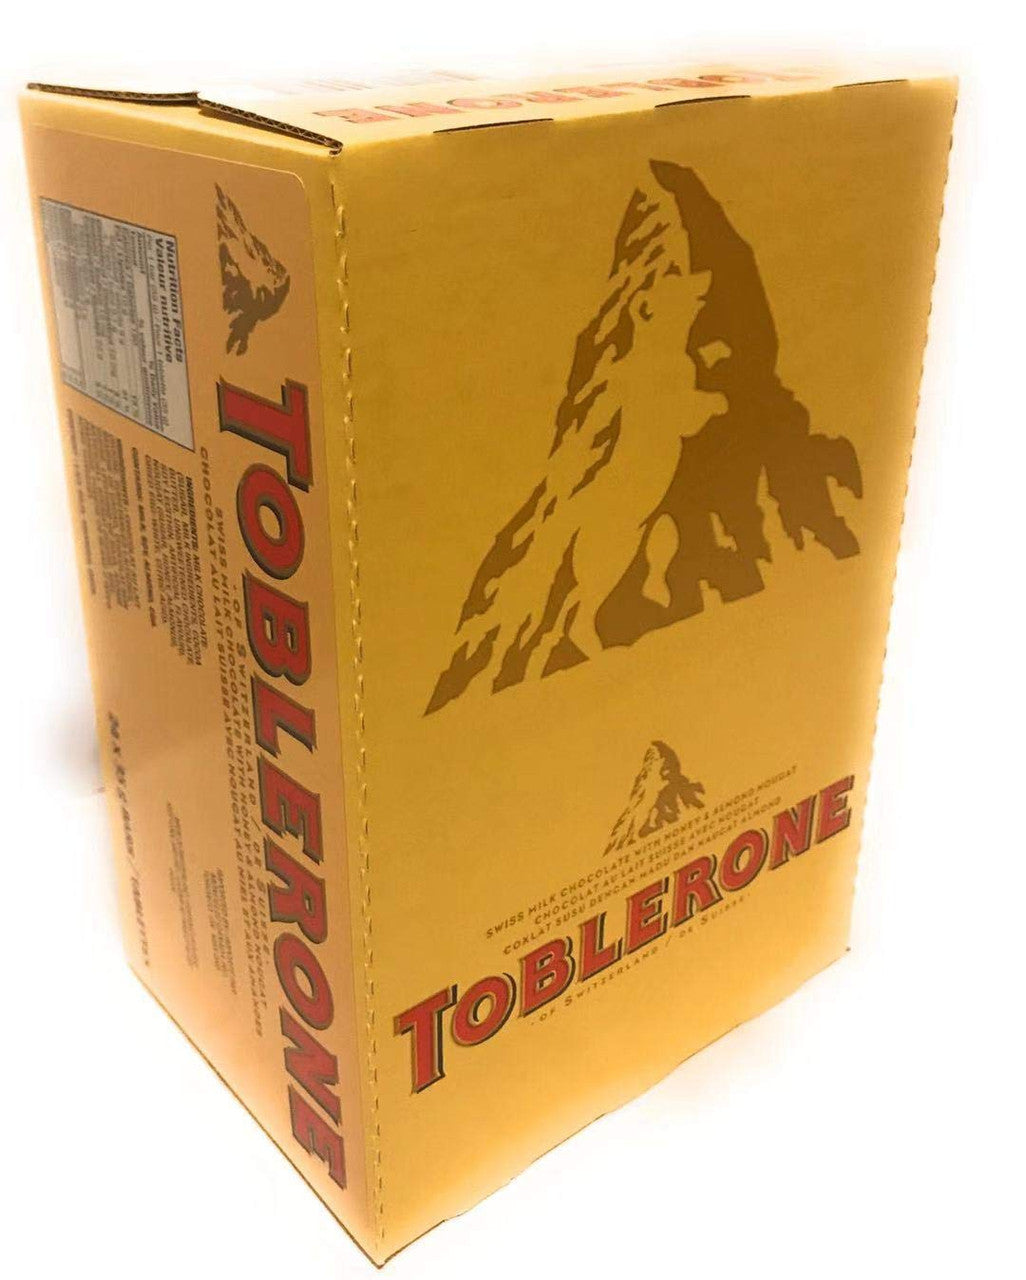 Toblerone Swiss Milk Chocolate - 24x35g (2 Boxes) {Imported from Canada}